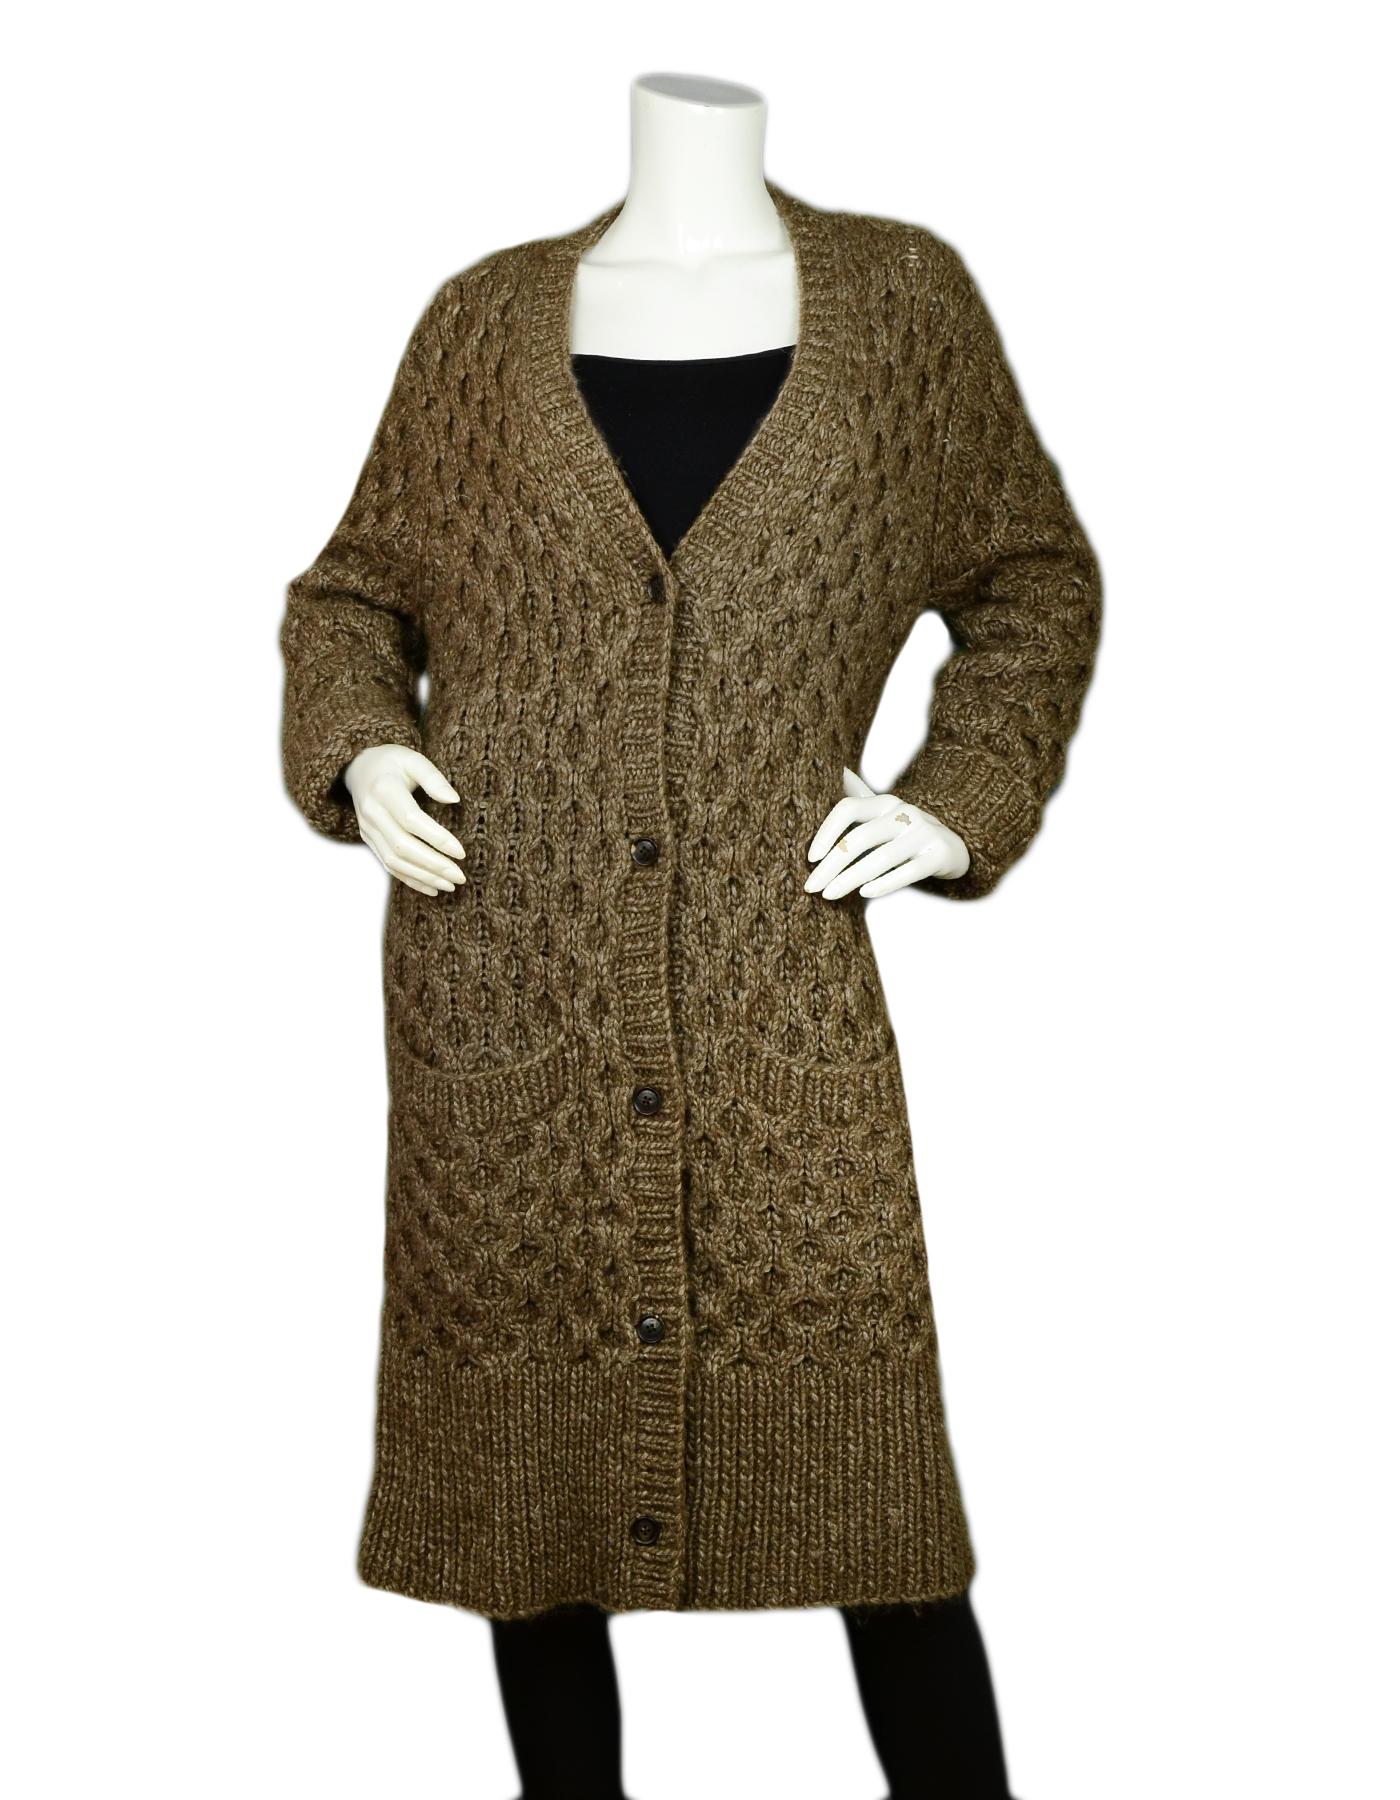 Michael Kors Brown Alpaca Wool Extra Long Knit Sweater Coat sz S

Made In: China with Italian Materials
Color: Brown
Materials: 25% Alpaca, 45% Wool, 30% Acrylic  
Lining: 25% Alpaca, 45% Wool, 30% Acrylic  
Opening/Closure: Front buttons
Overall